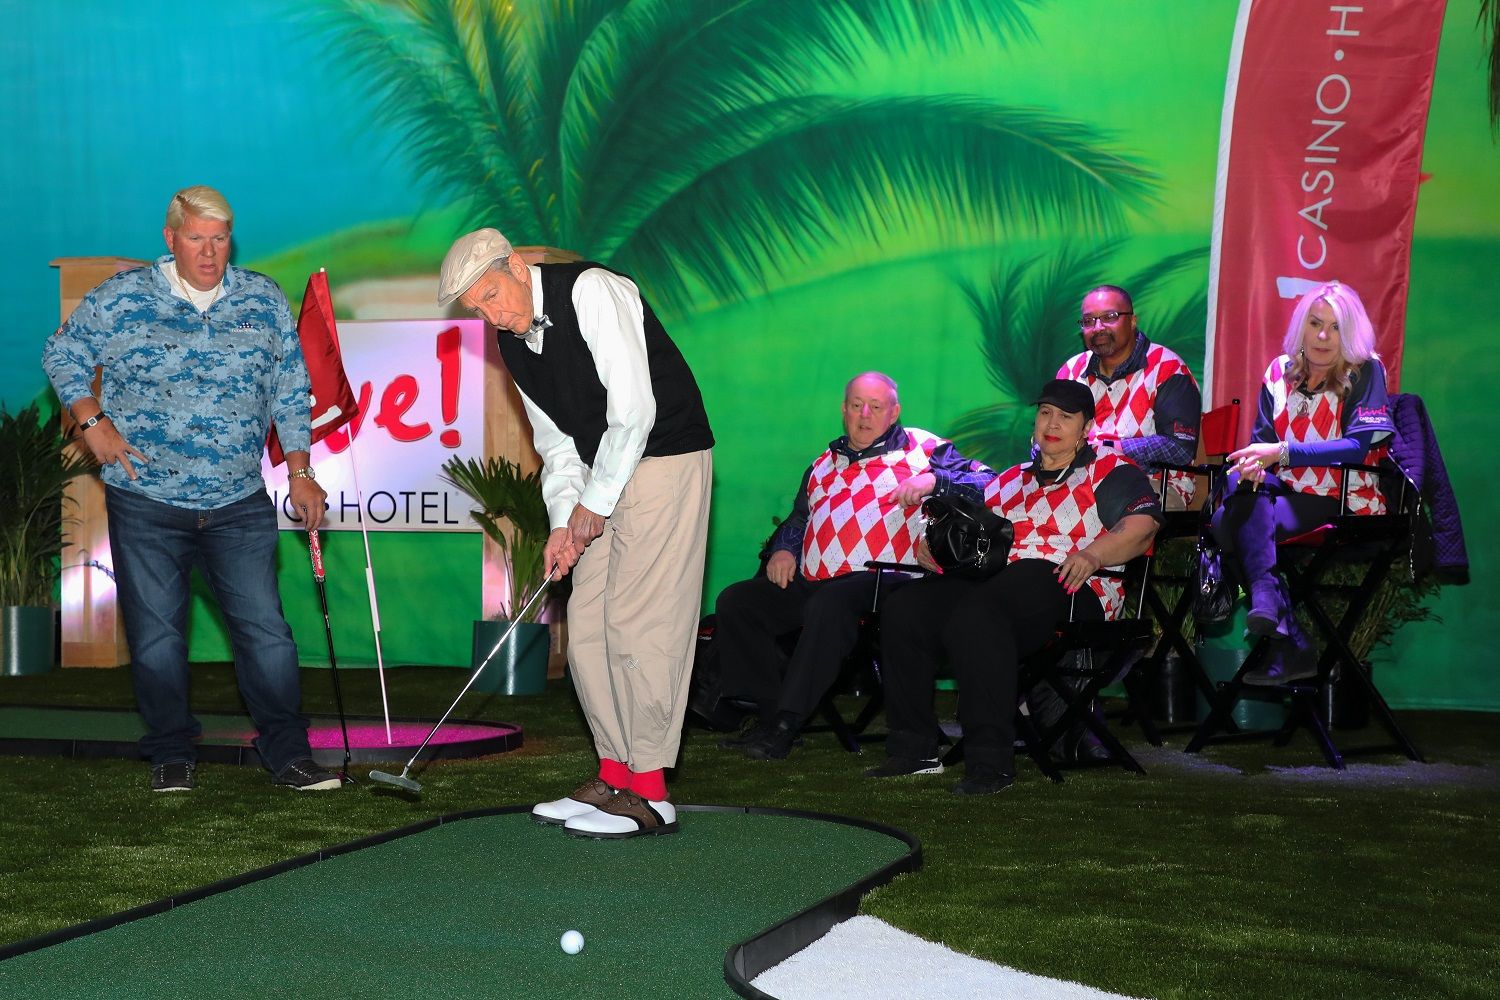 Daly and Cordish square off in a putting challenge at Center Stage, netting each lucky member of the audience teams $1,125. (Courtesy: Live! Casino & Hotel)